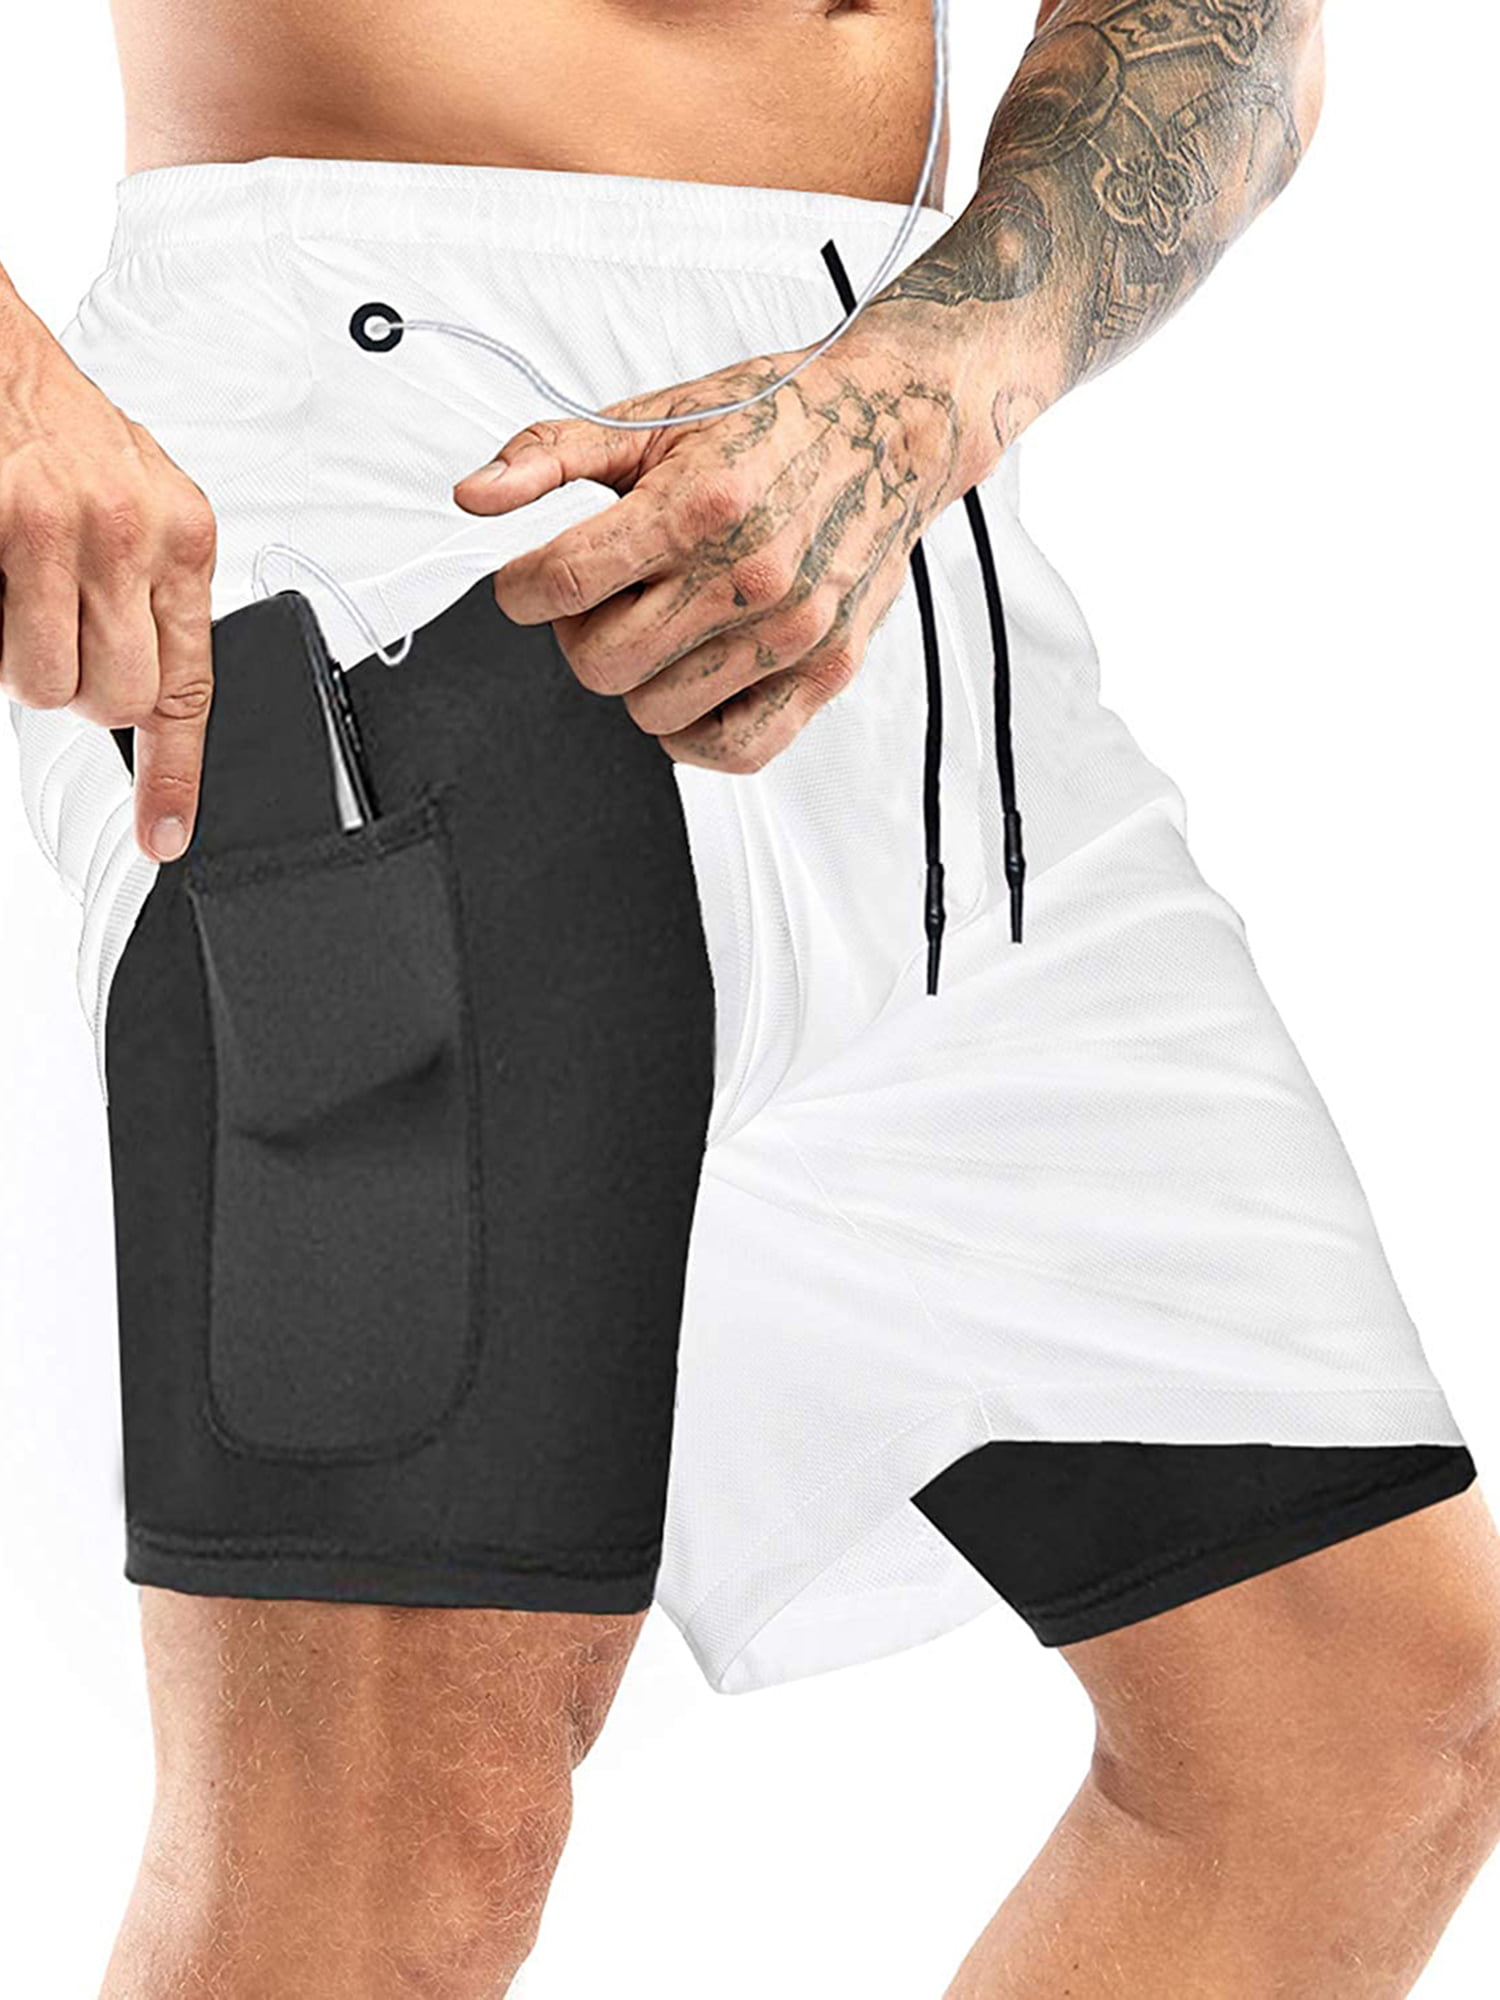 Genuiskids Mens 2 in 1 Running Shorts | Gym Workout Athletic Training Compression Underwear Liner Double Layer Sports Shorts with Headphone Hole White -